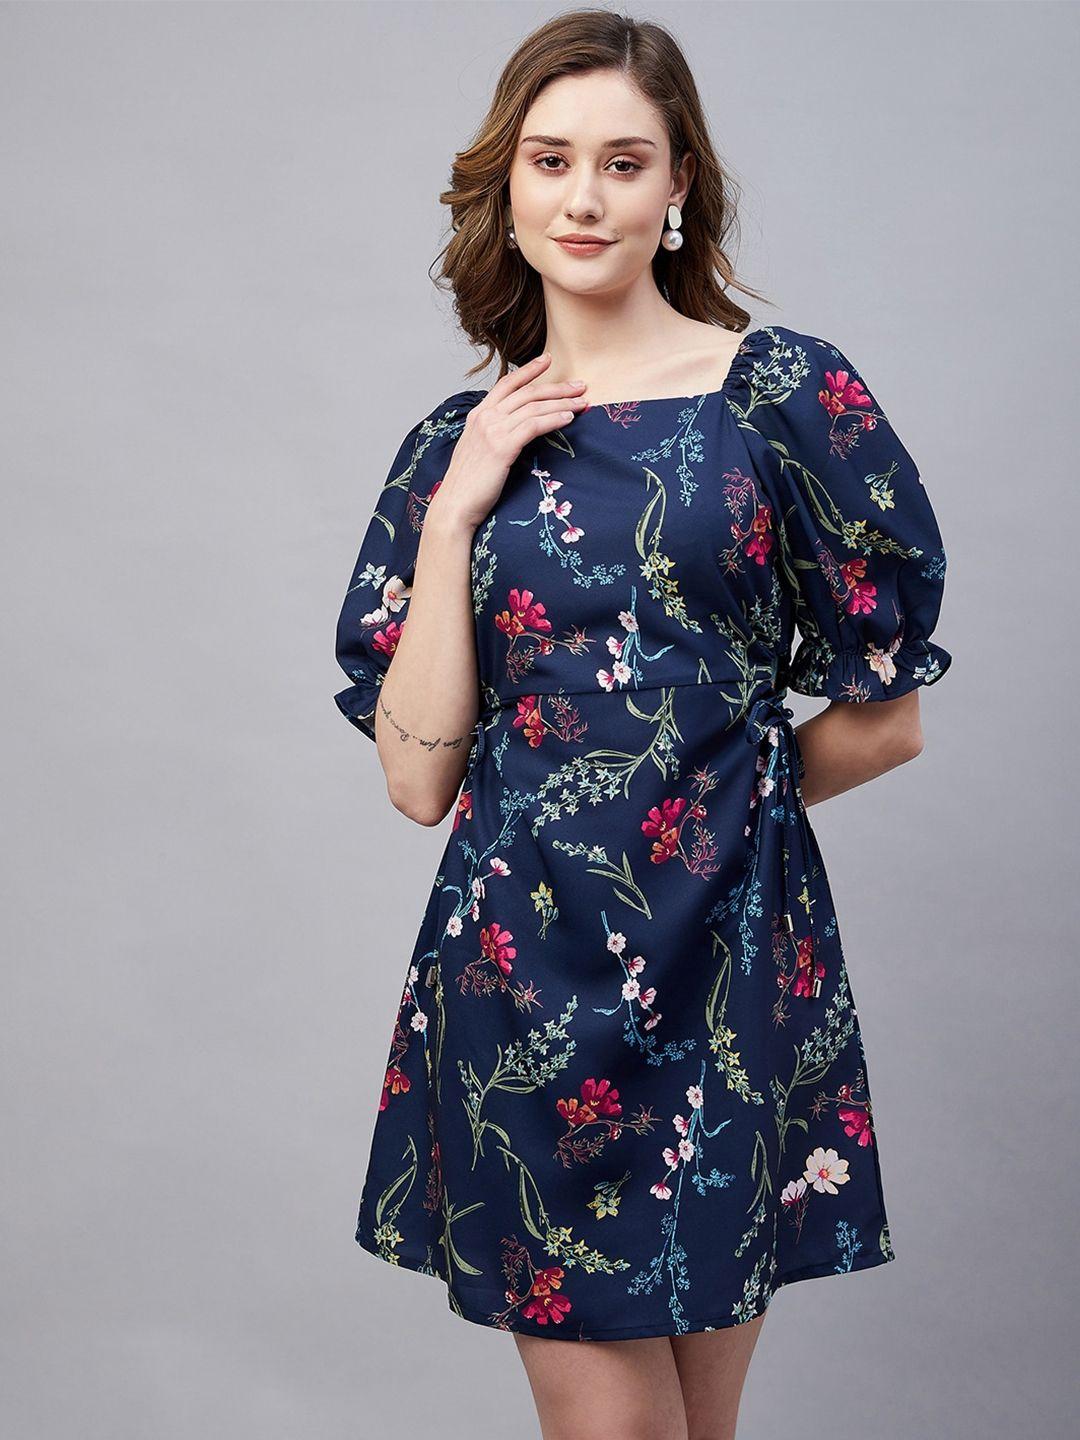 marie claire navy blue floral printed flared sleeve georgette fit & flare dress